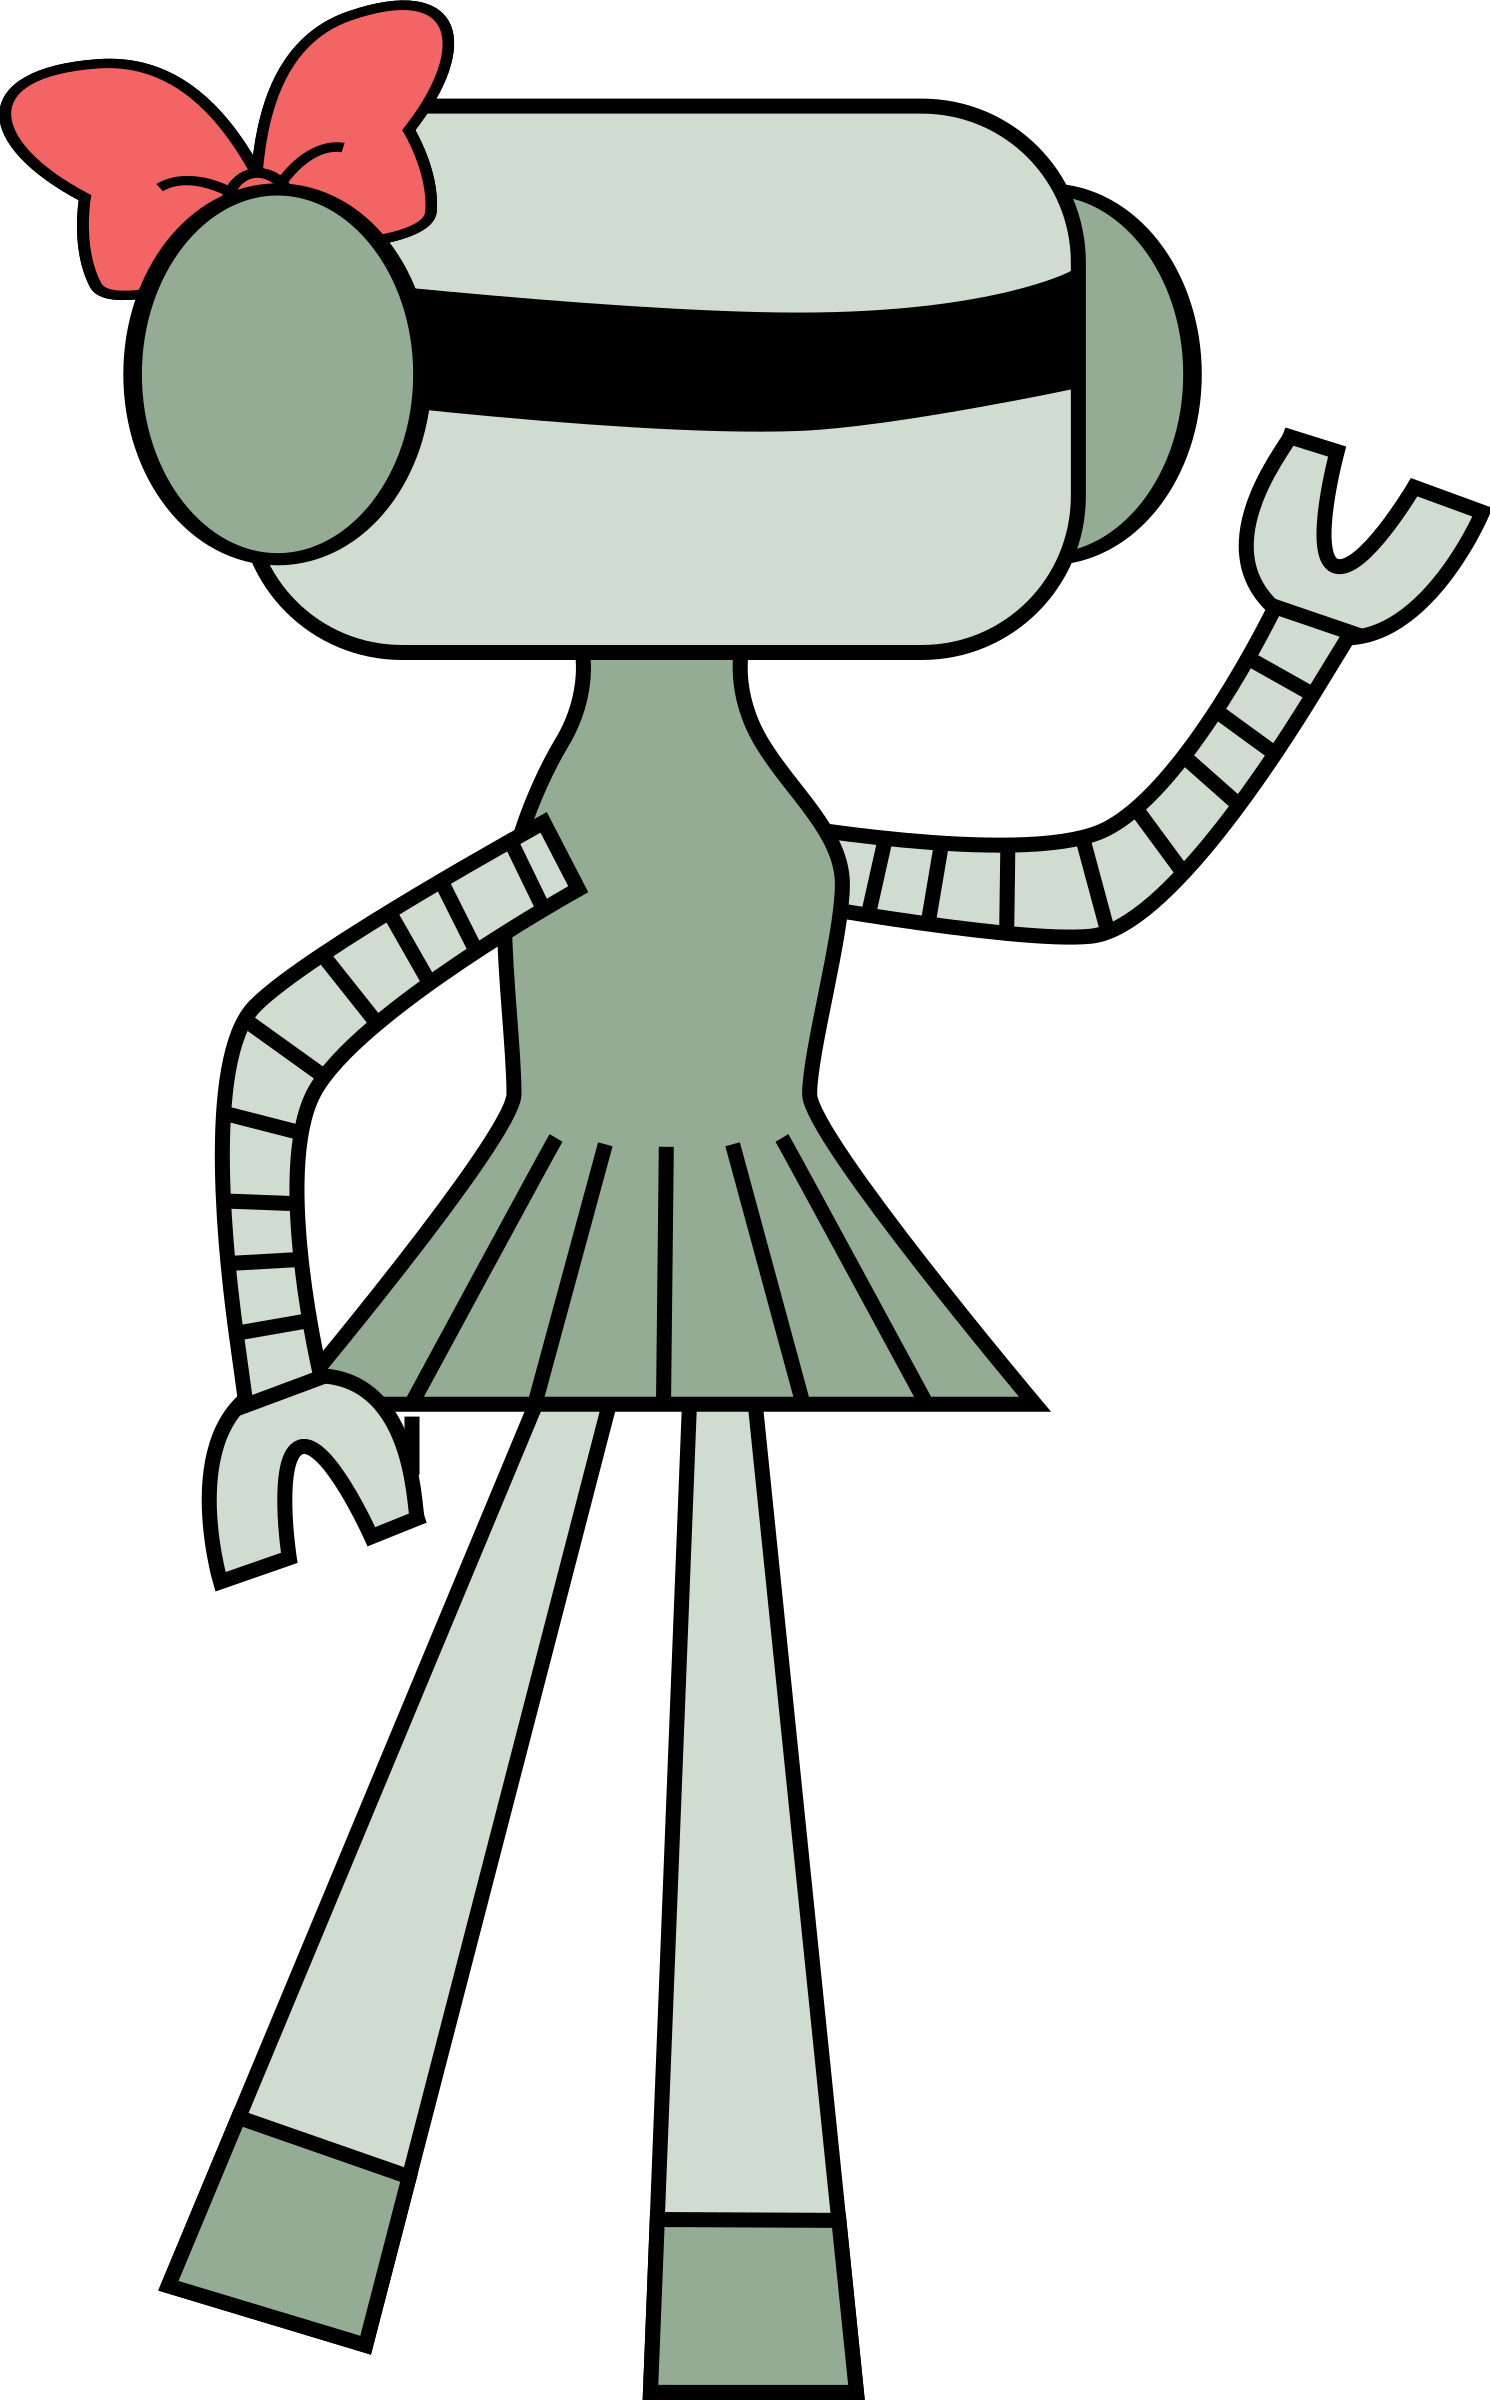 Cute robot girl clipart black and white